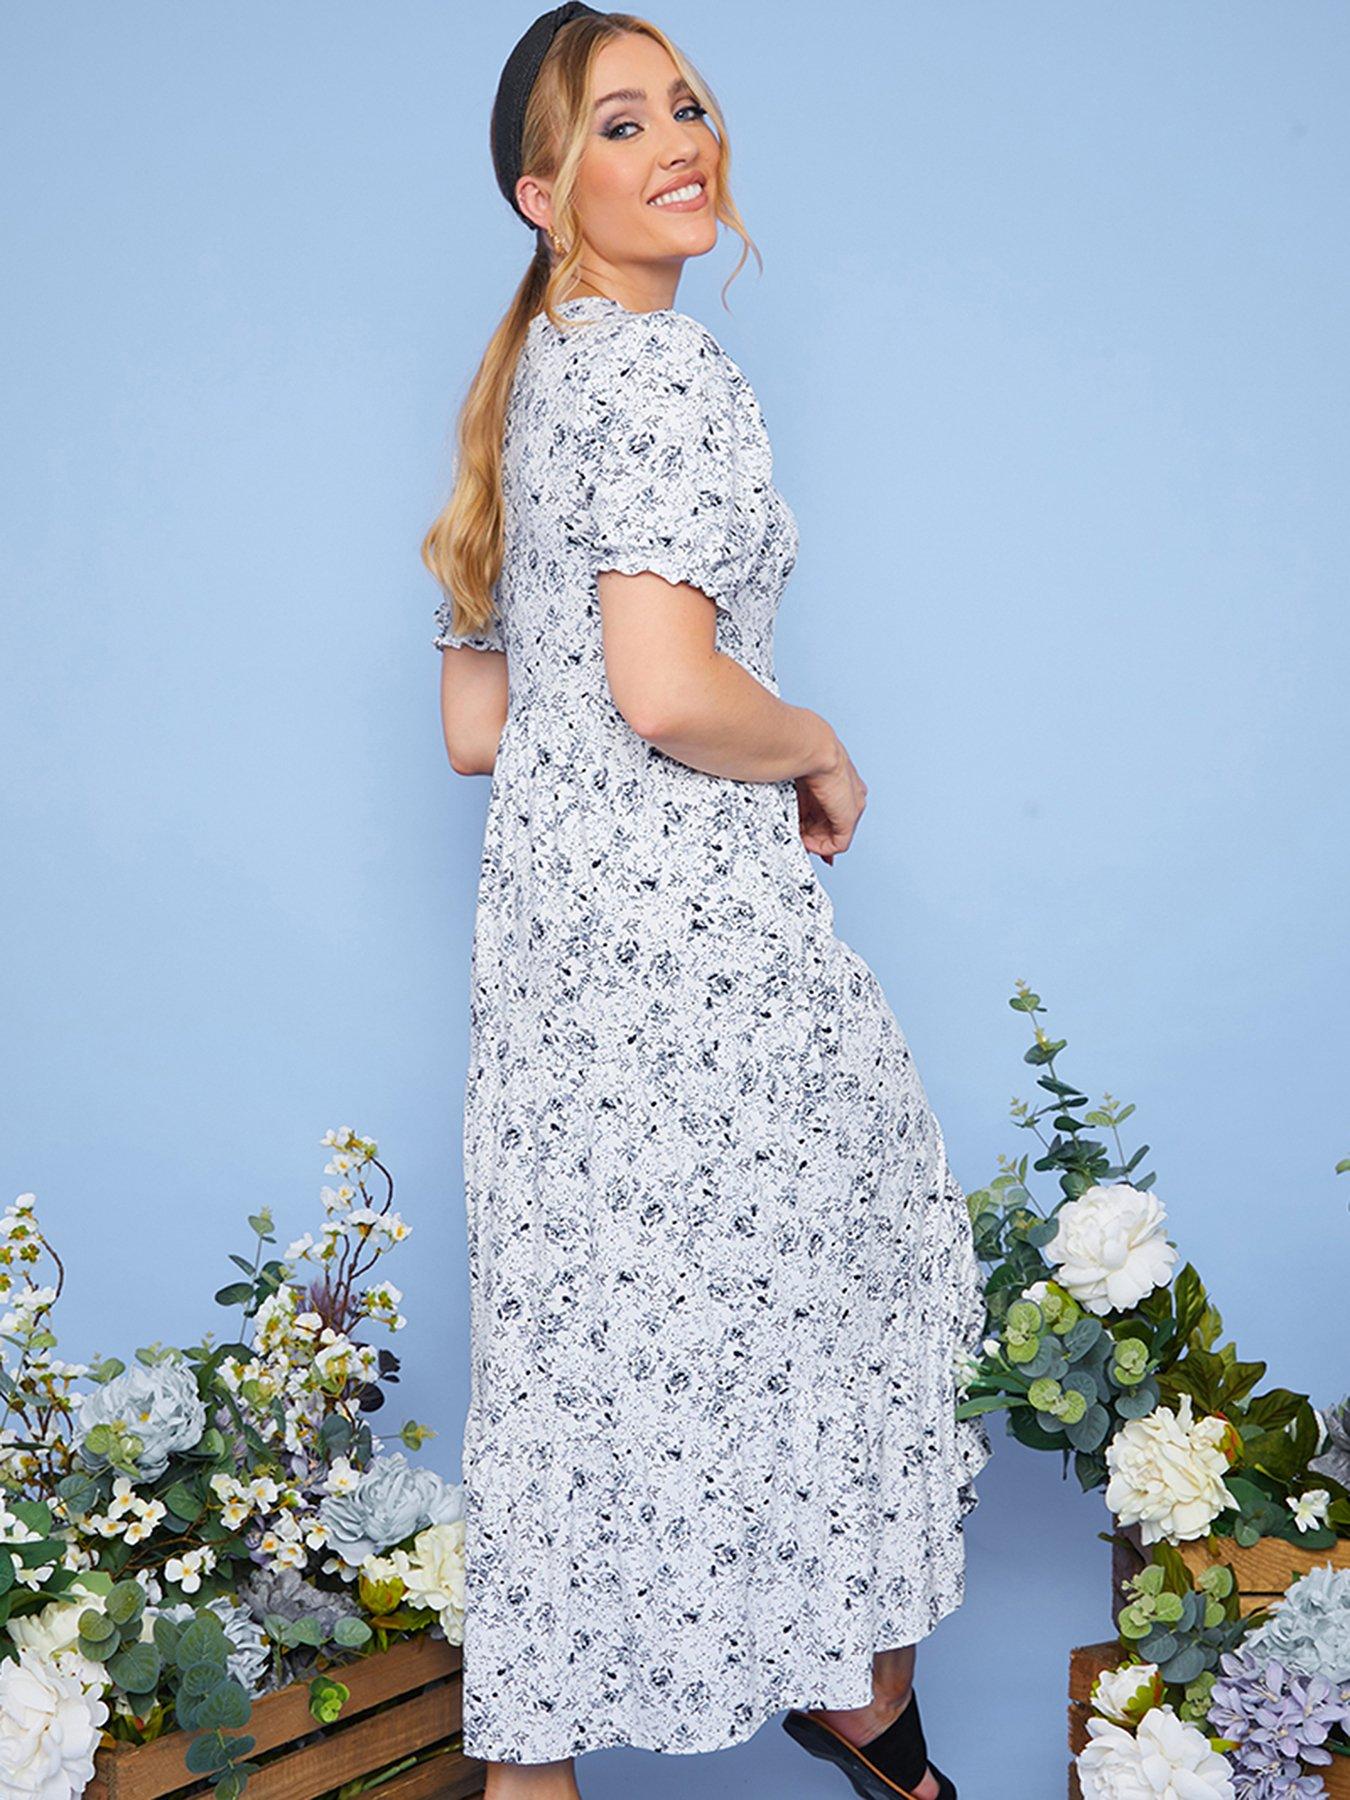 In The Style Stacey Solomon Blue Floral ...